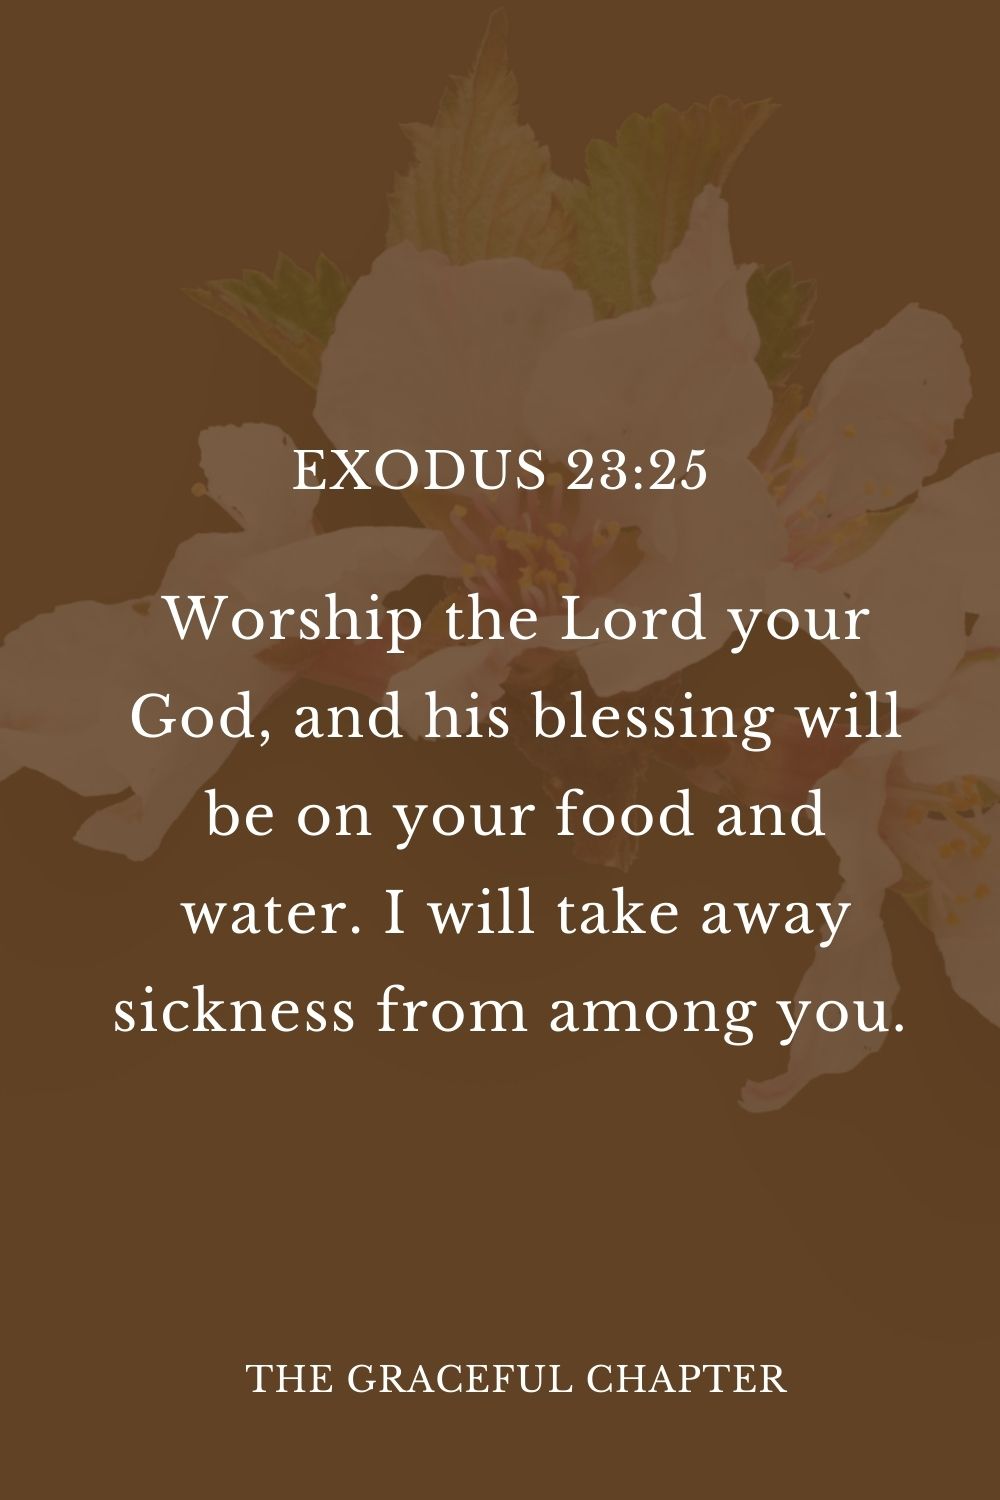 Worship the Lord your God, and his blessing will be on your food and water. I will take away sickness from among you.  Exodus 23:25